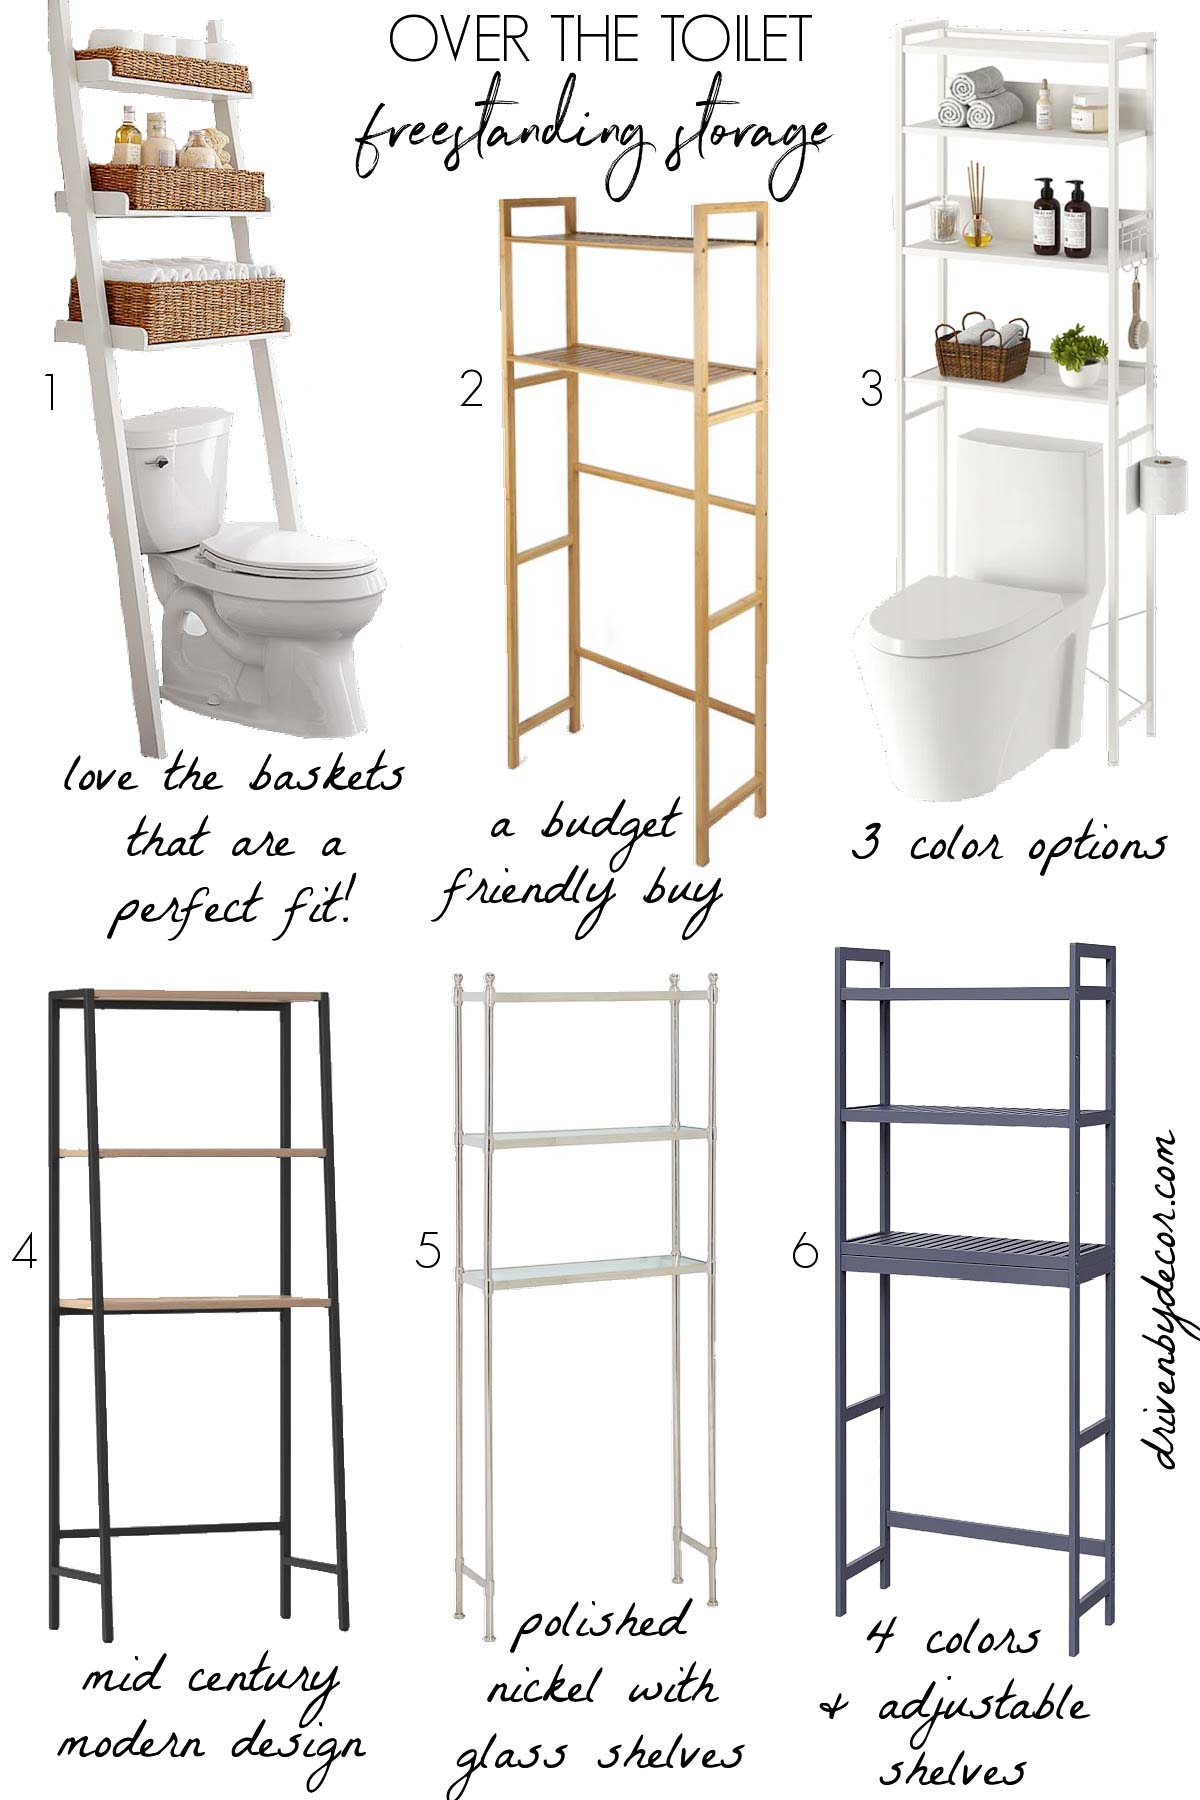 Freestanding over the toilet storage